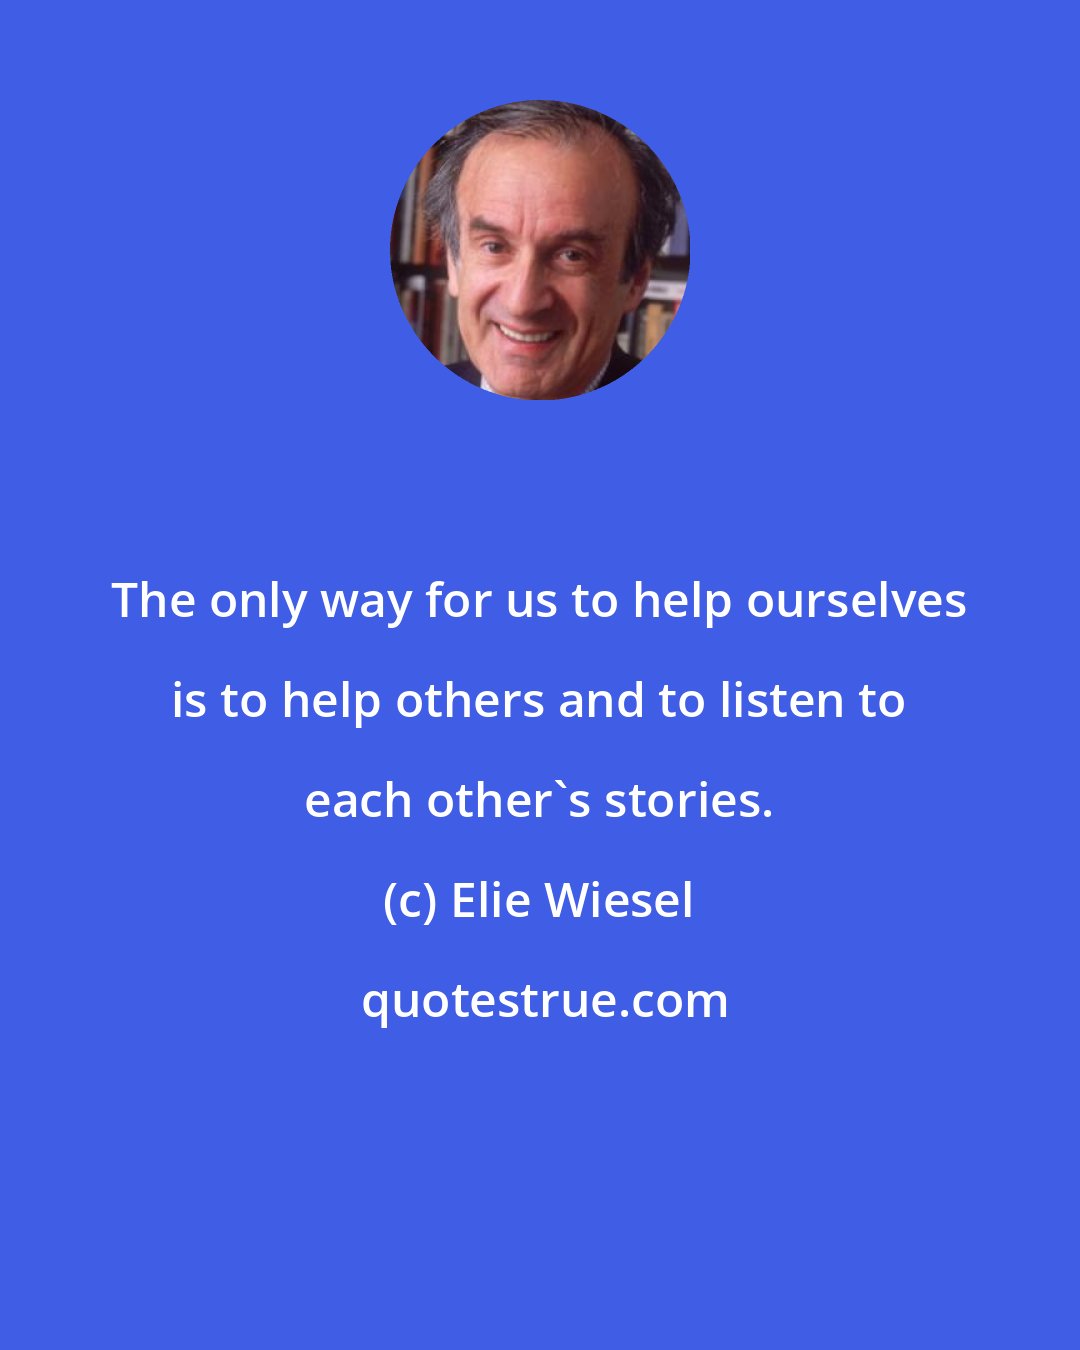 Elie Wiesel: The only way for us to help ourselves is to help others and to listen to each other's stories.